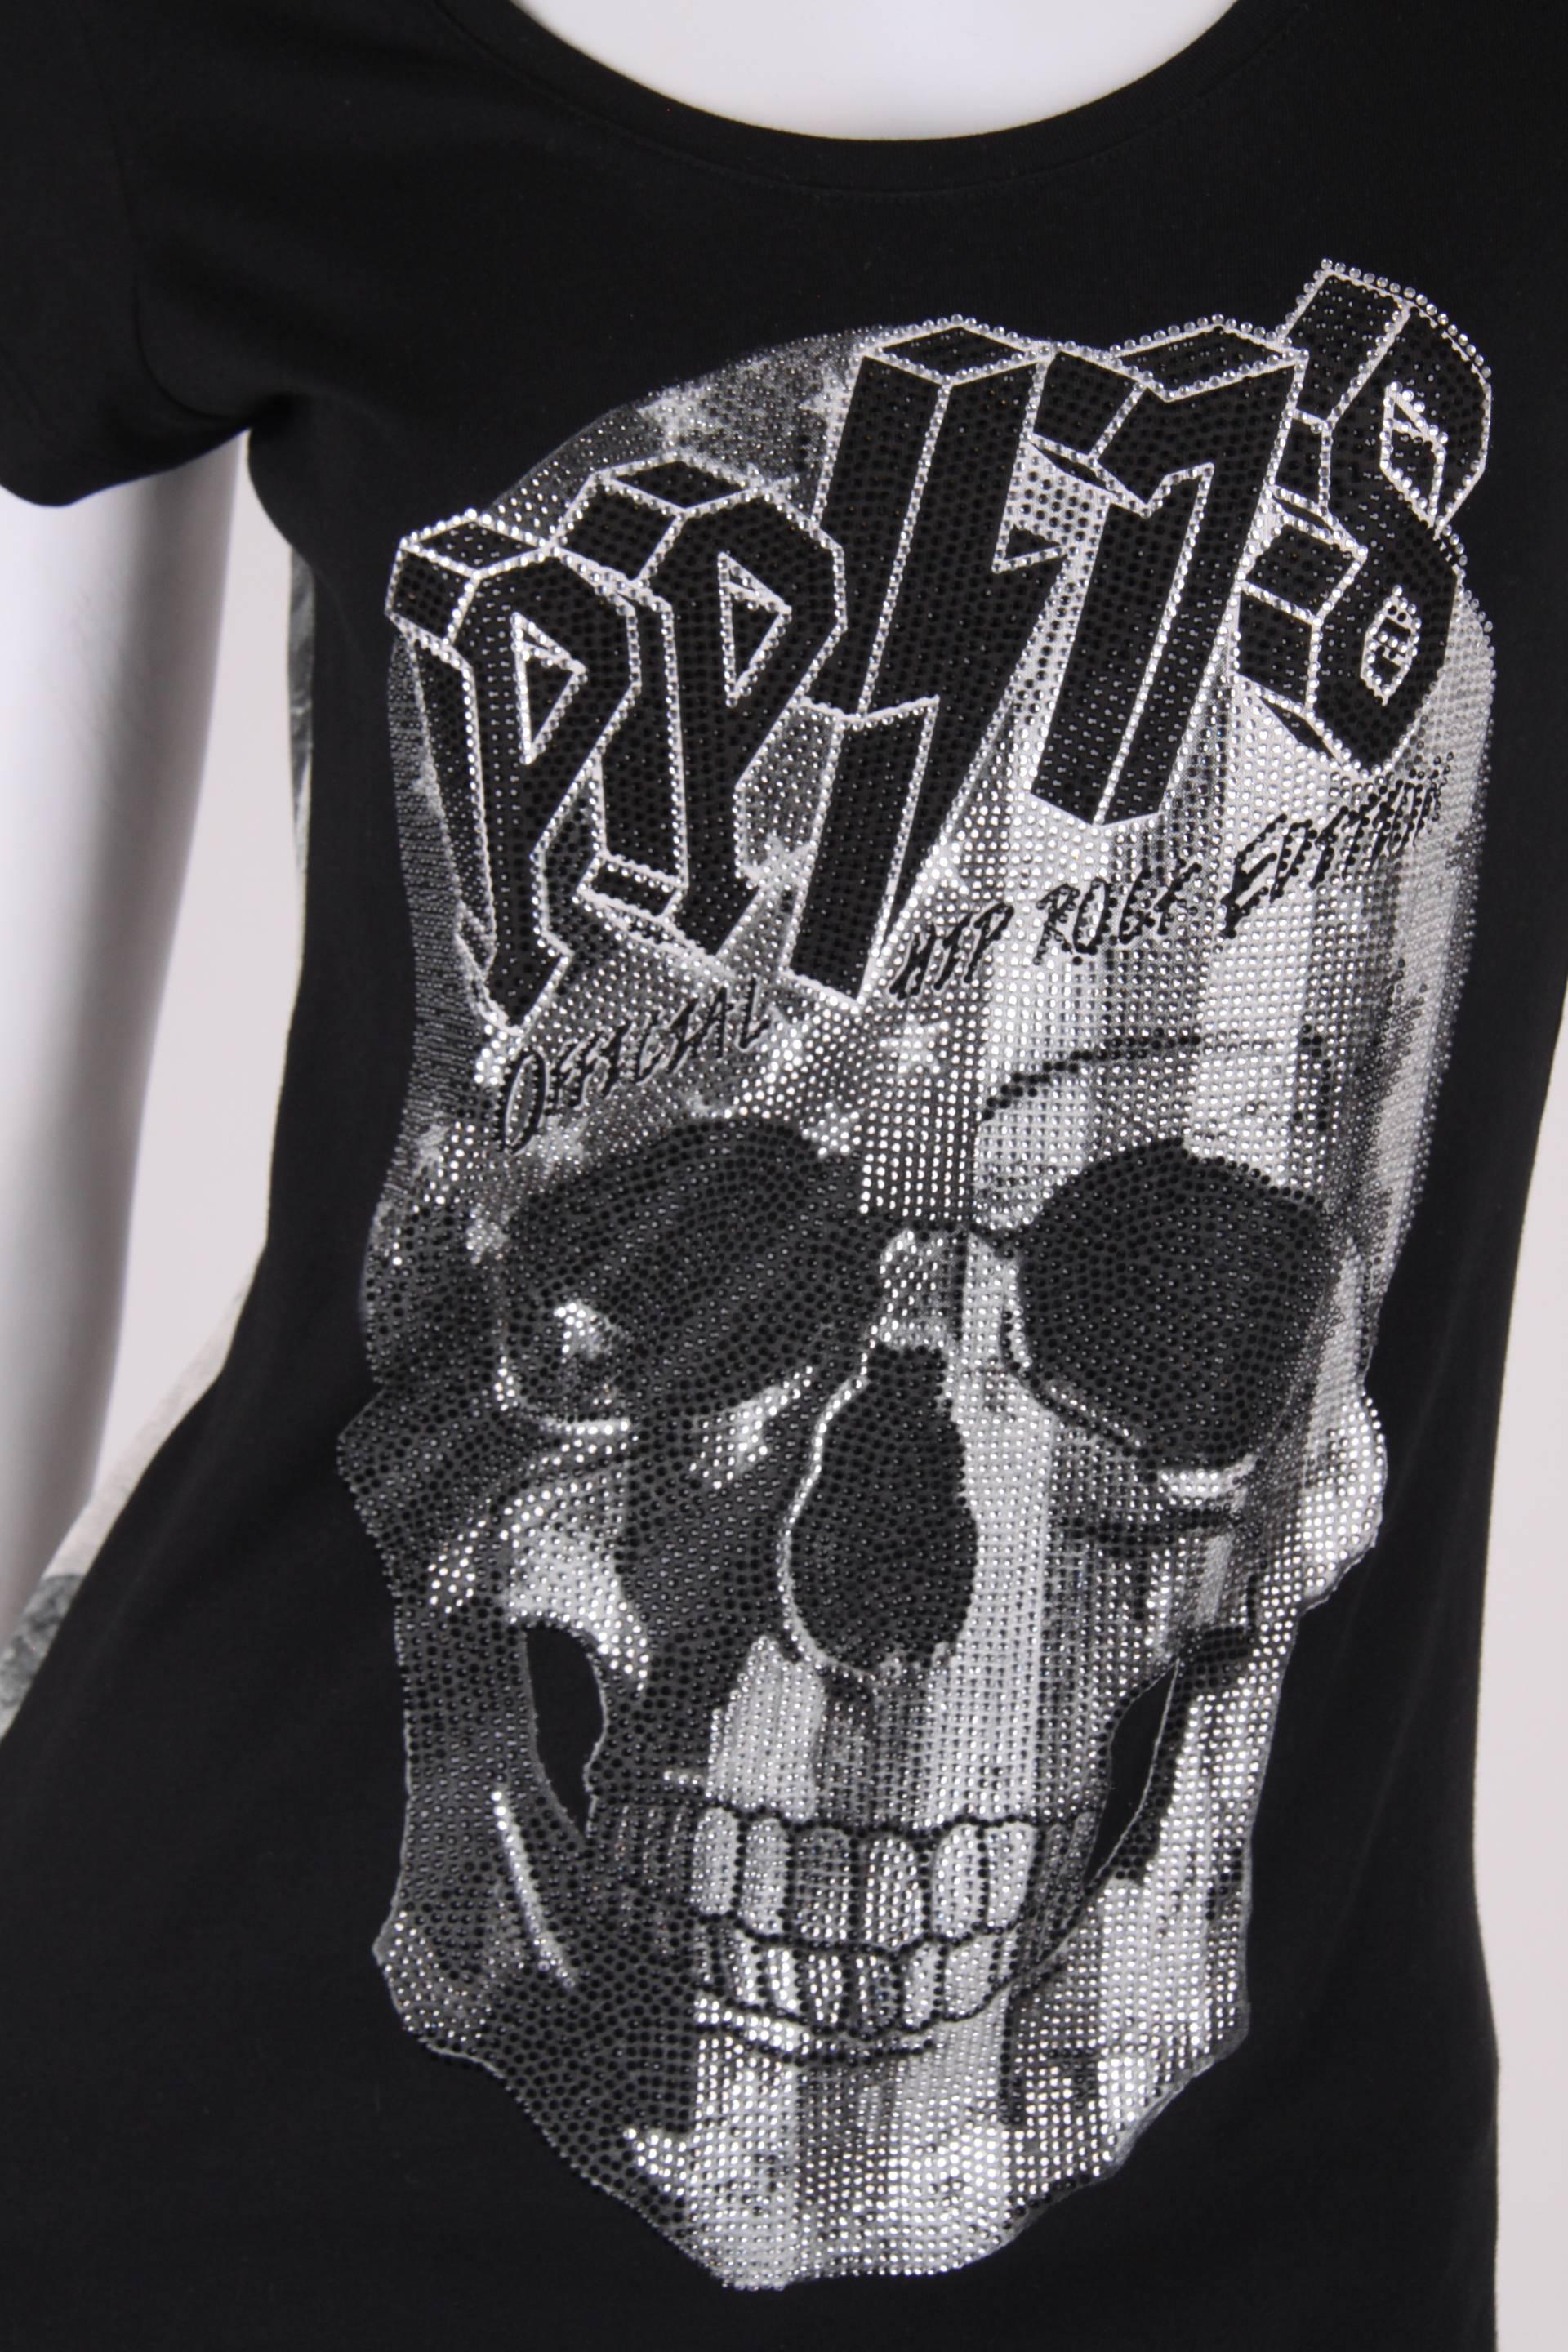 Impressive! Philipp Plein t-shirt with a skull print covered with white, black and grey crystals.

A scoop neckline and short sleeves. The back is fully covered with a large print in black, white, grey and red. At the top in big characters 'PHILIPP